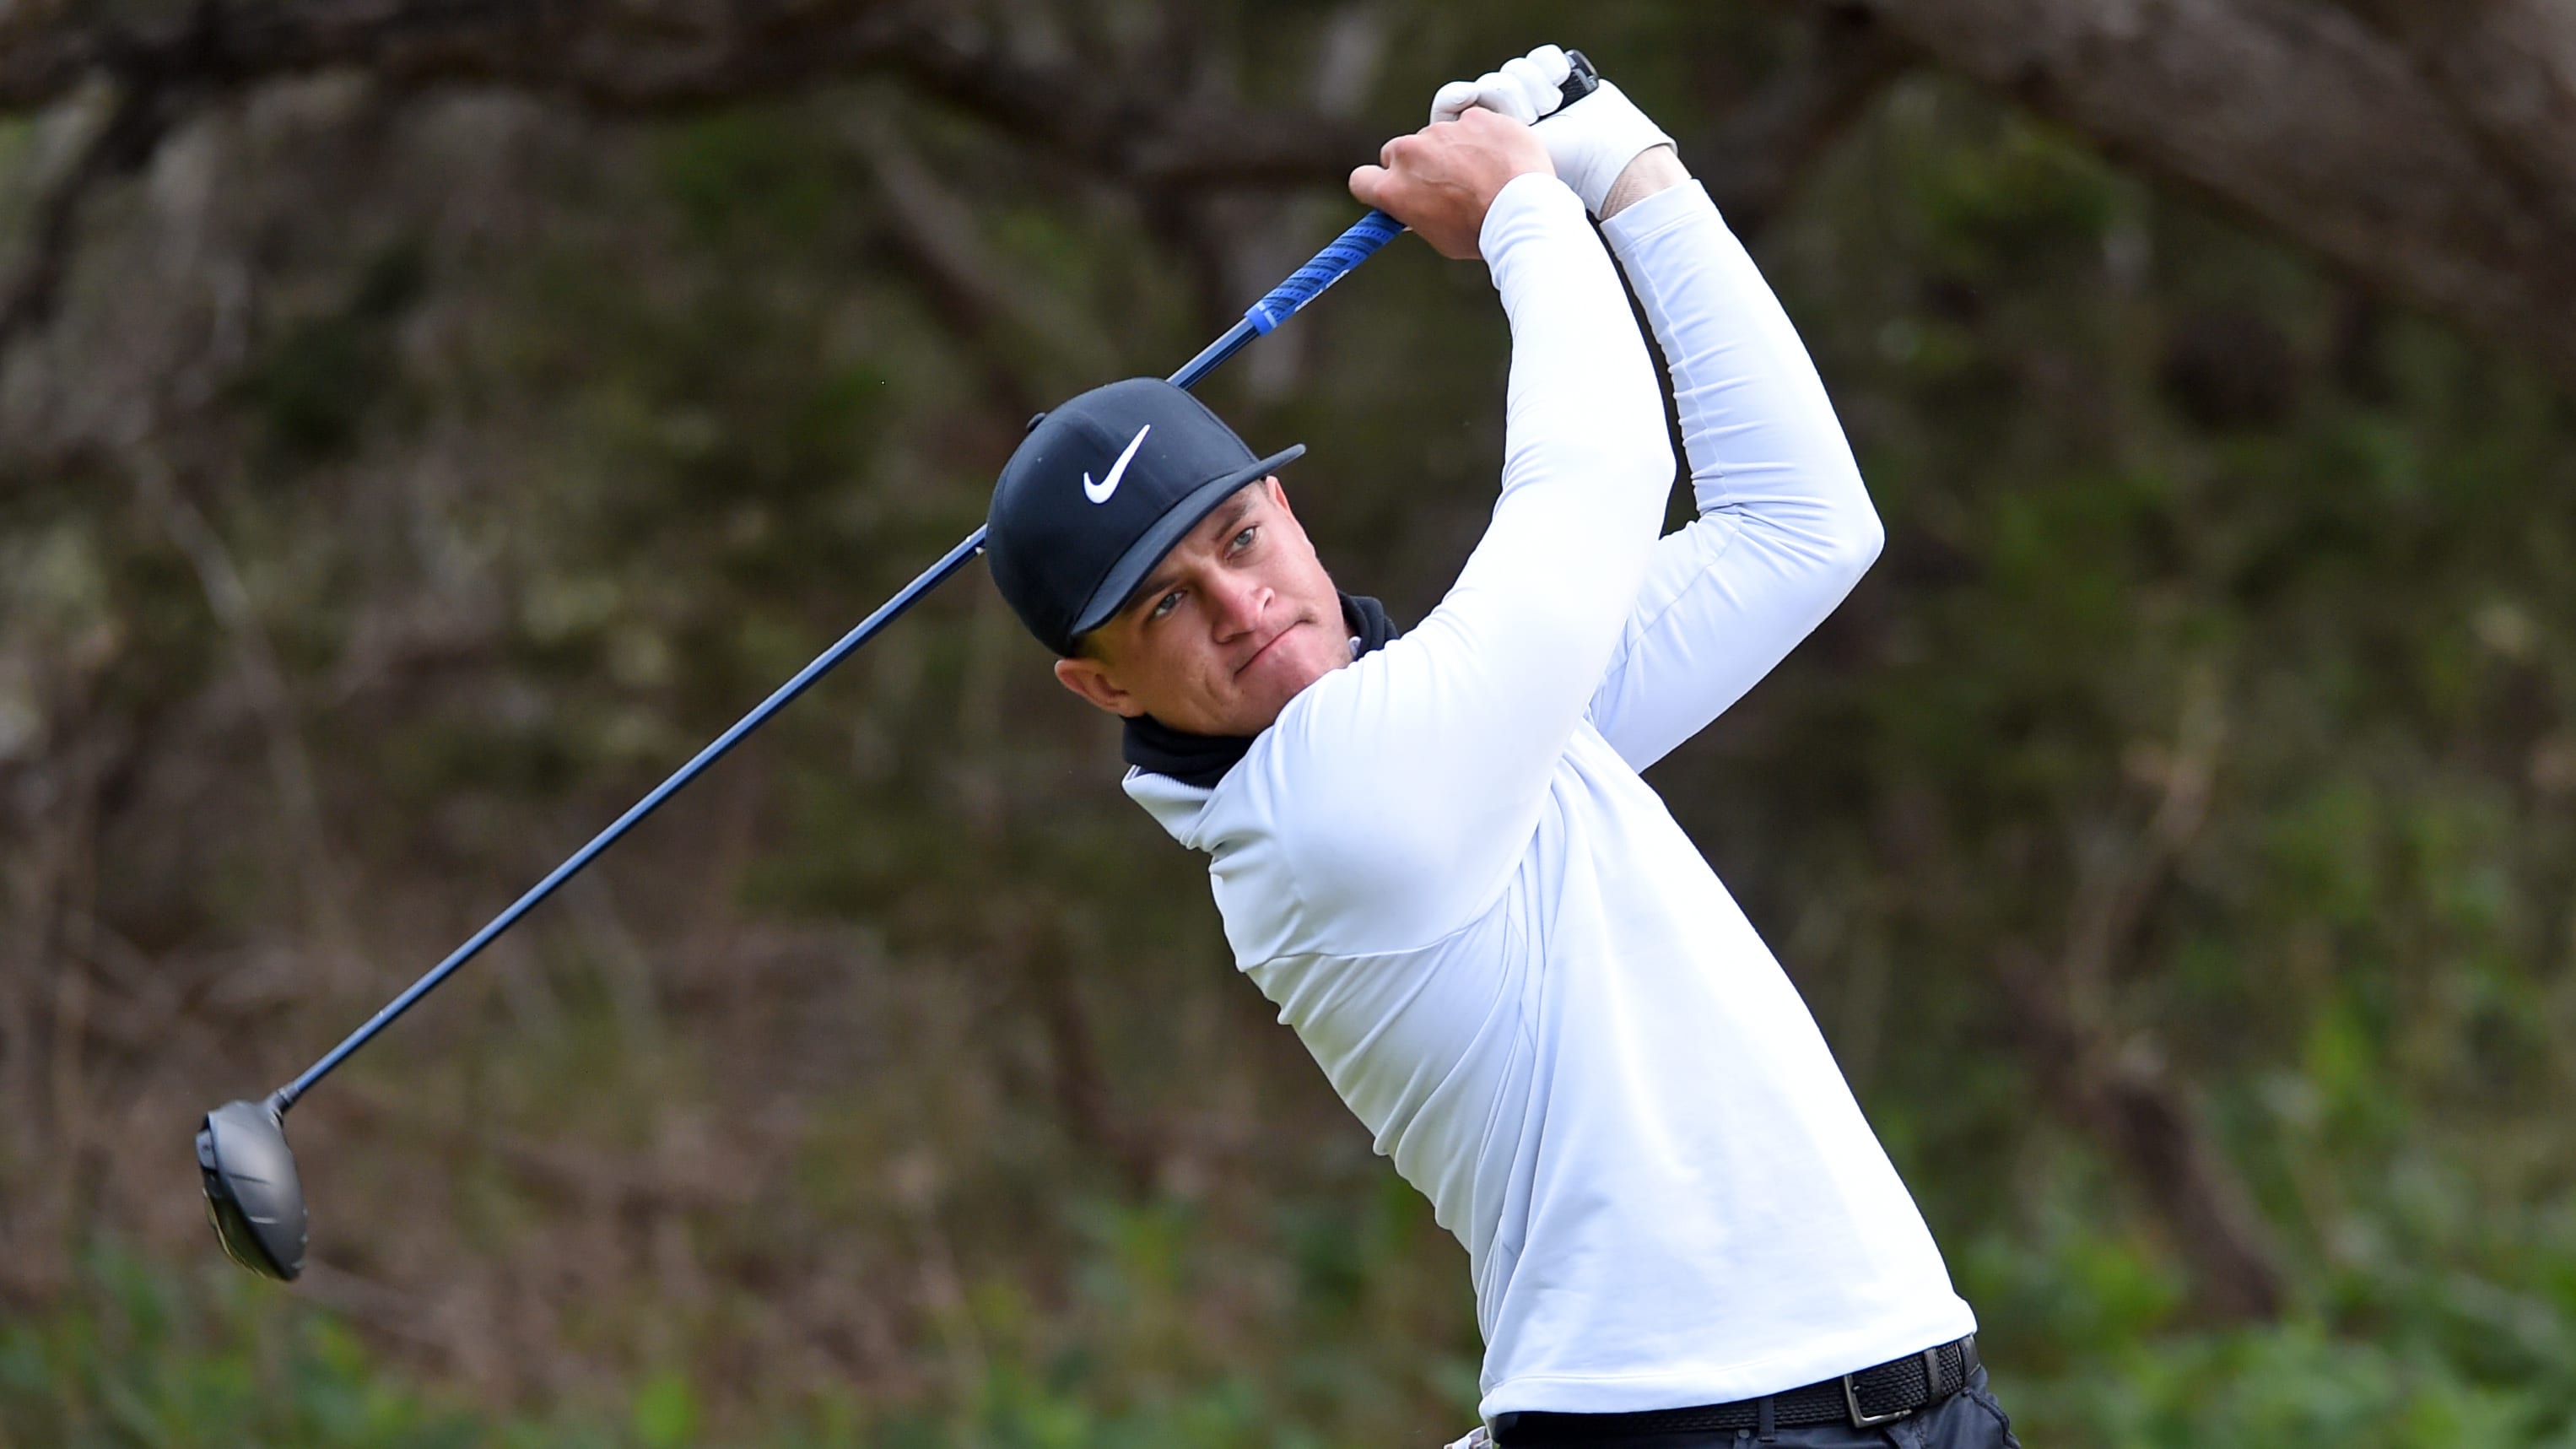 The 2023 Masters Tournament 2023 Odds: Cameron Champ